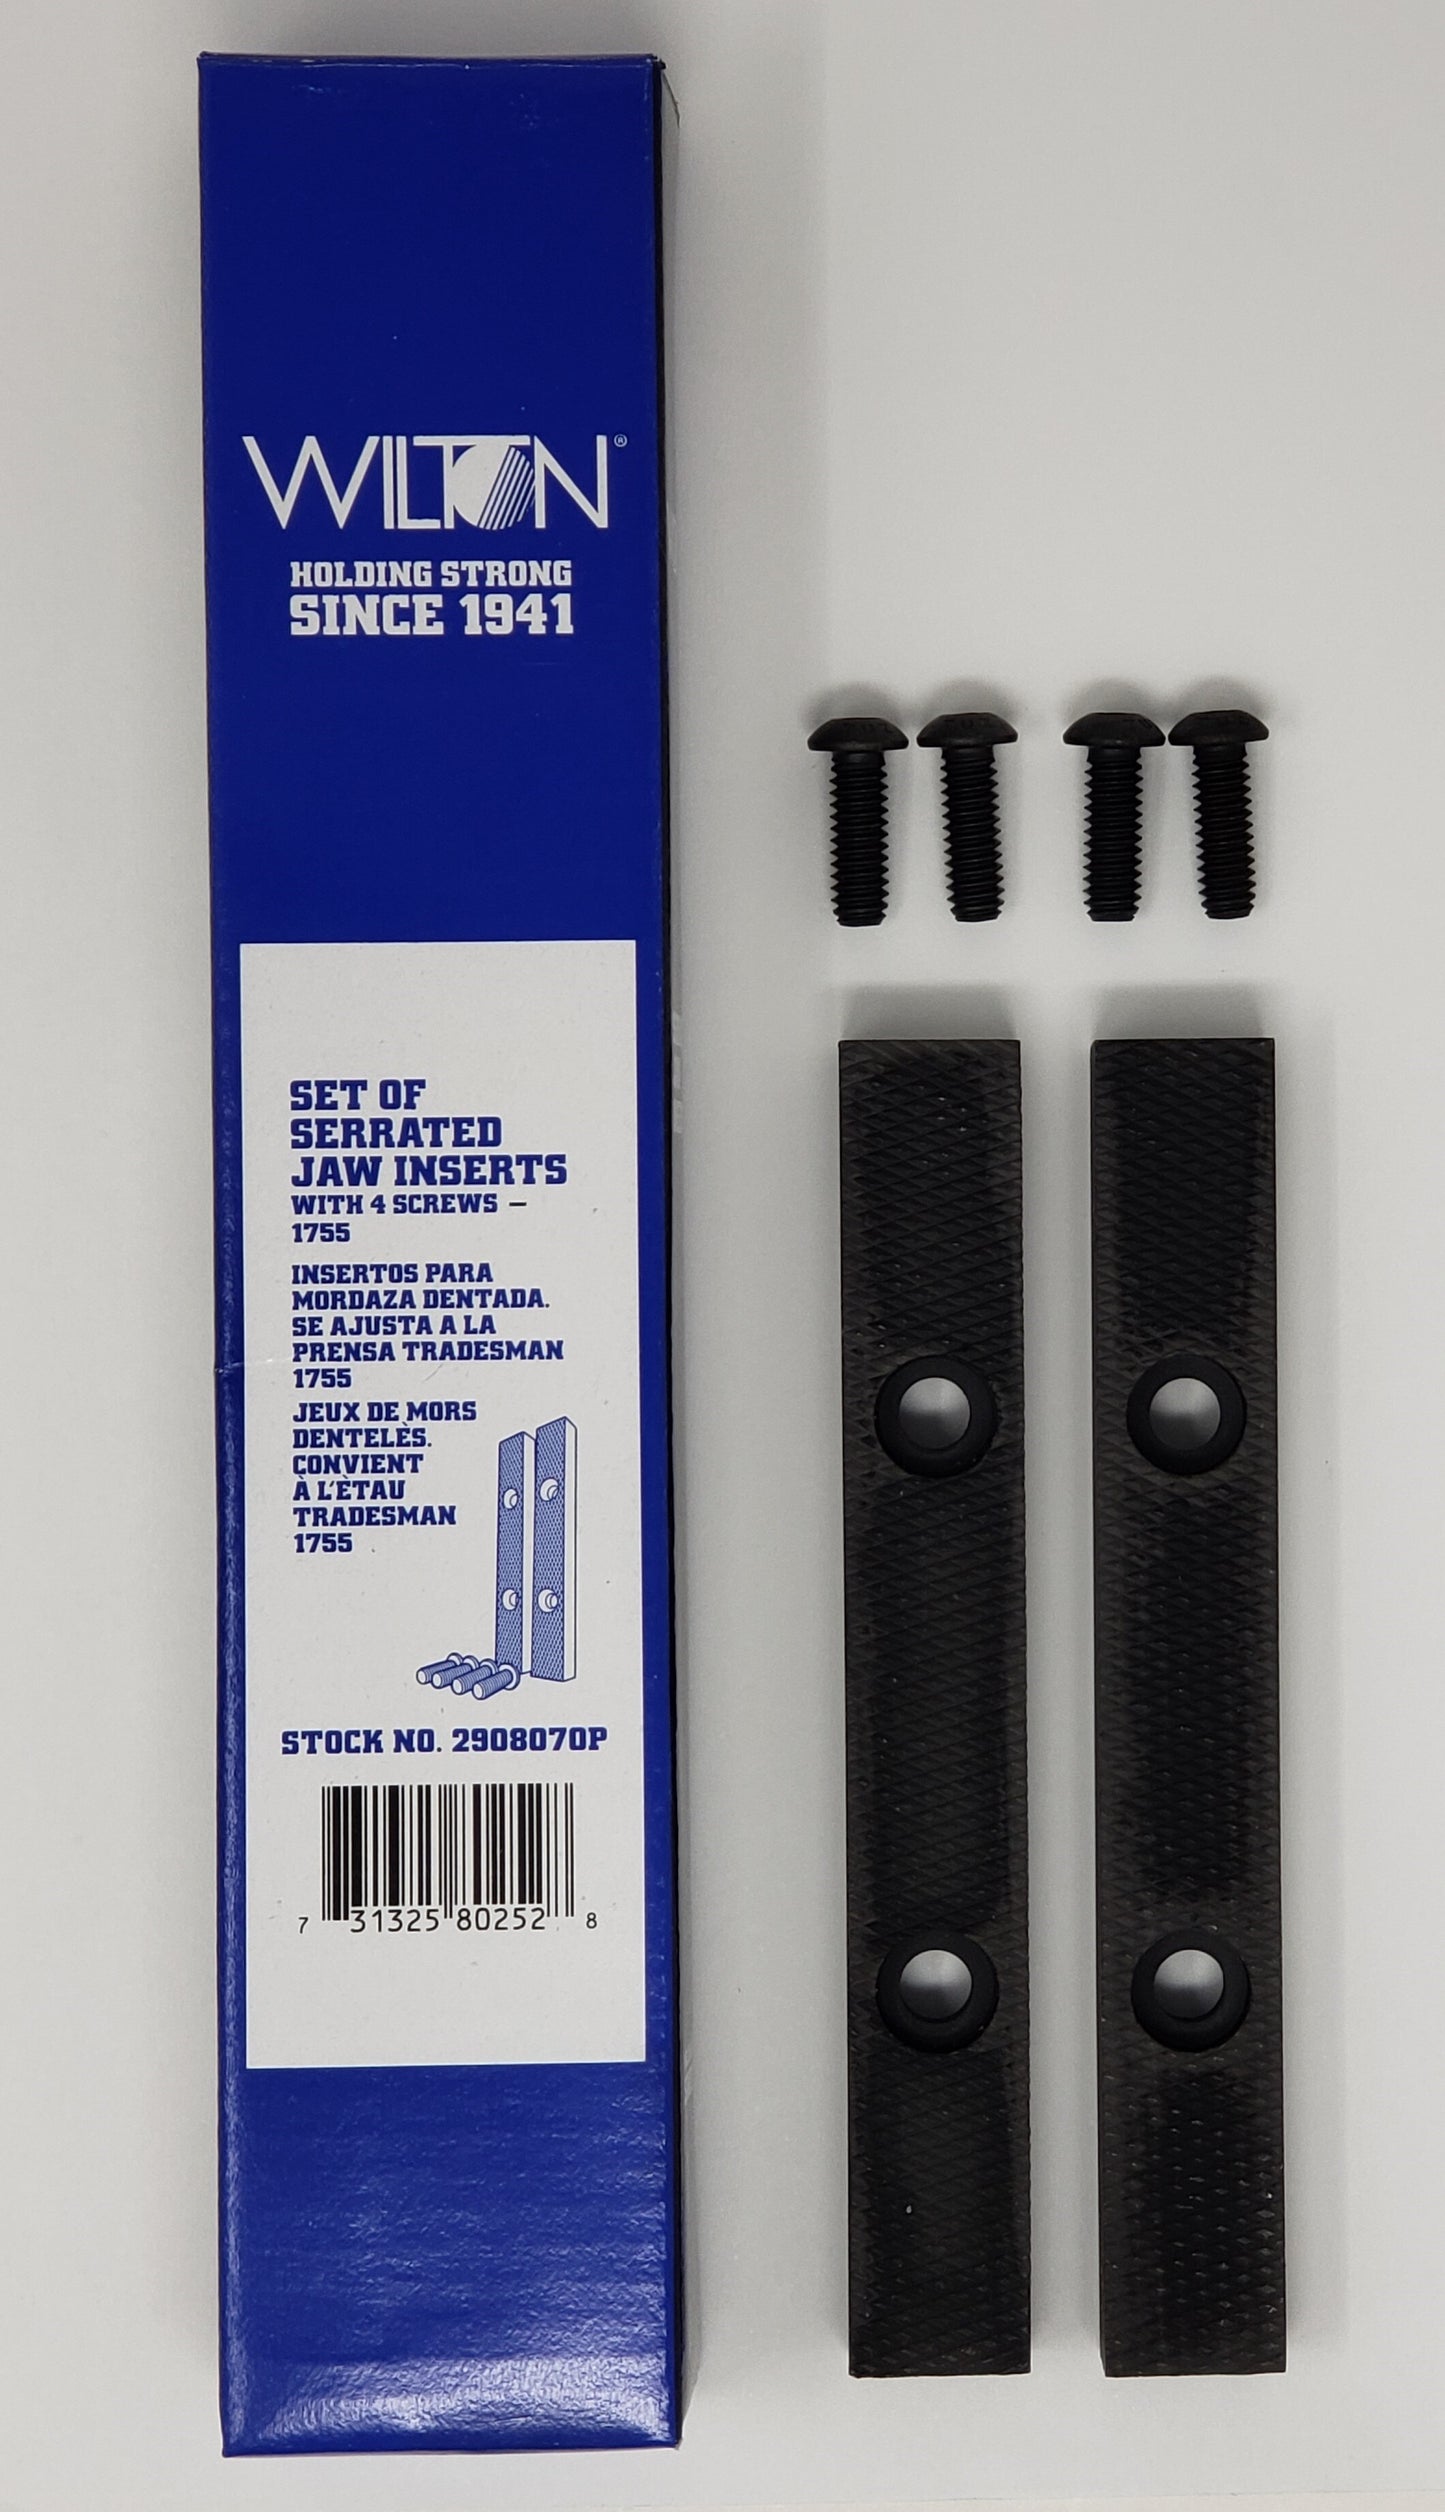 Set of Serrated Jaw Inserts w/ 4 Screws, 1755, Boxed